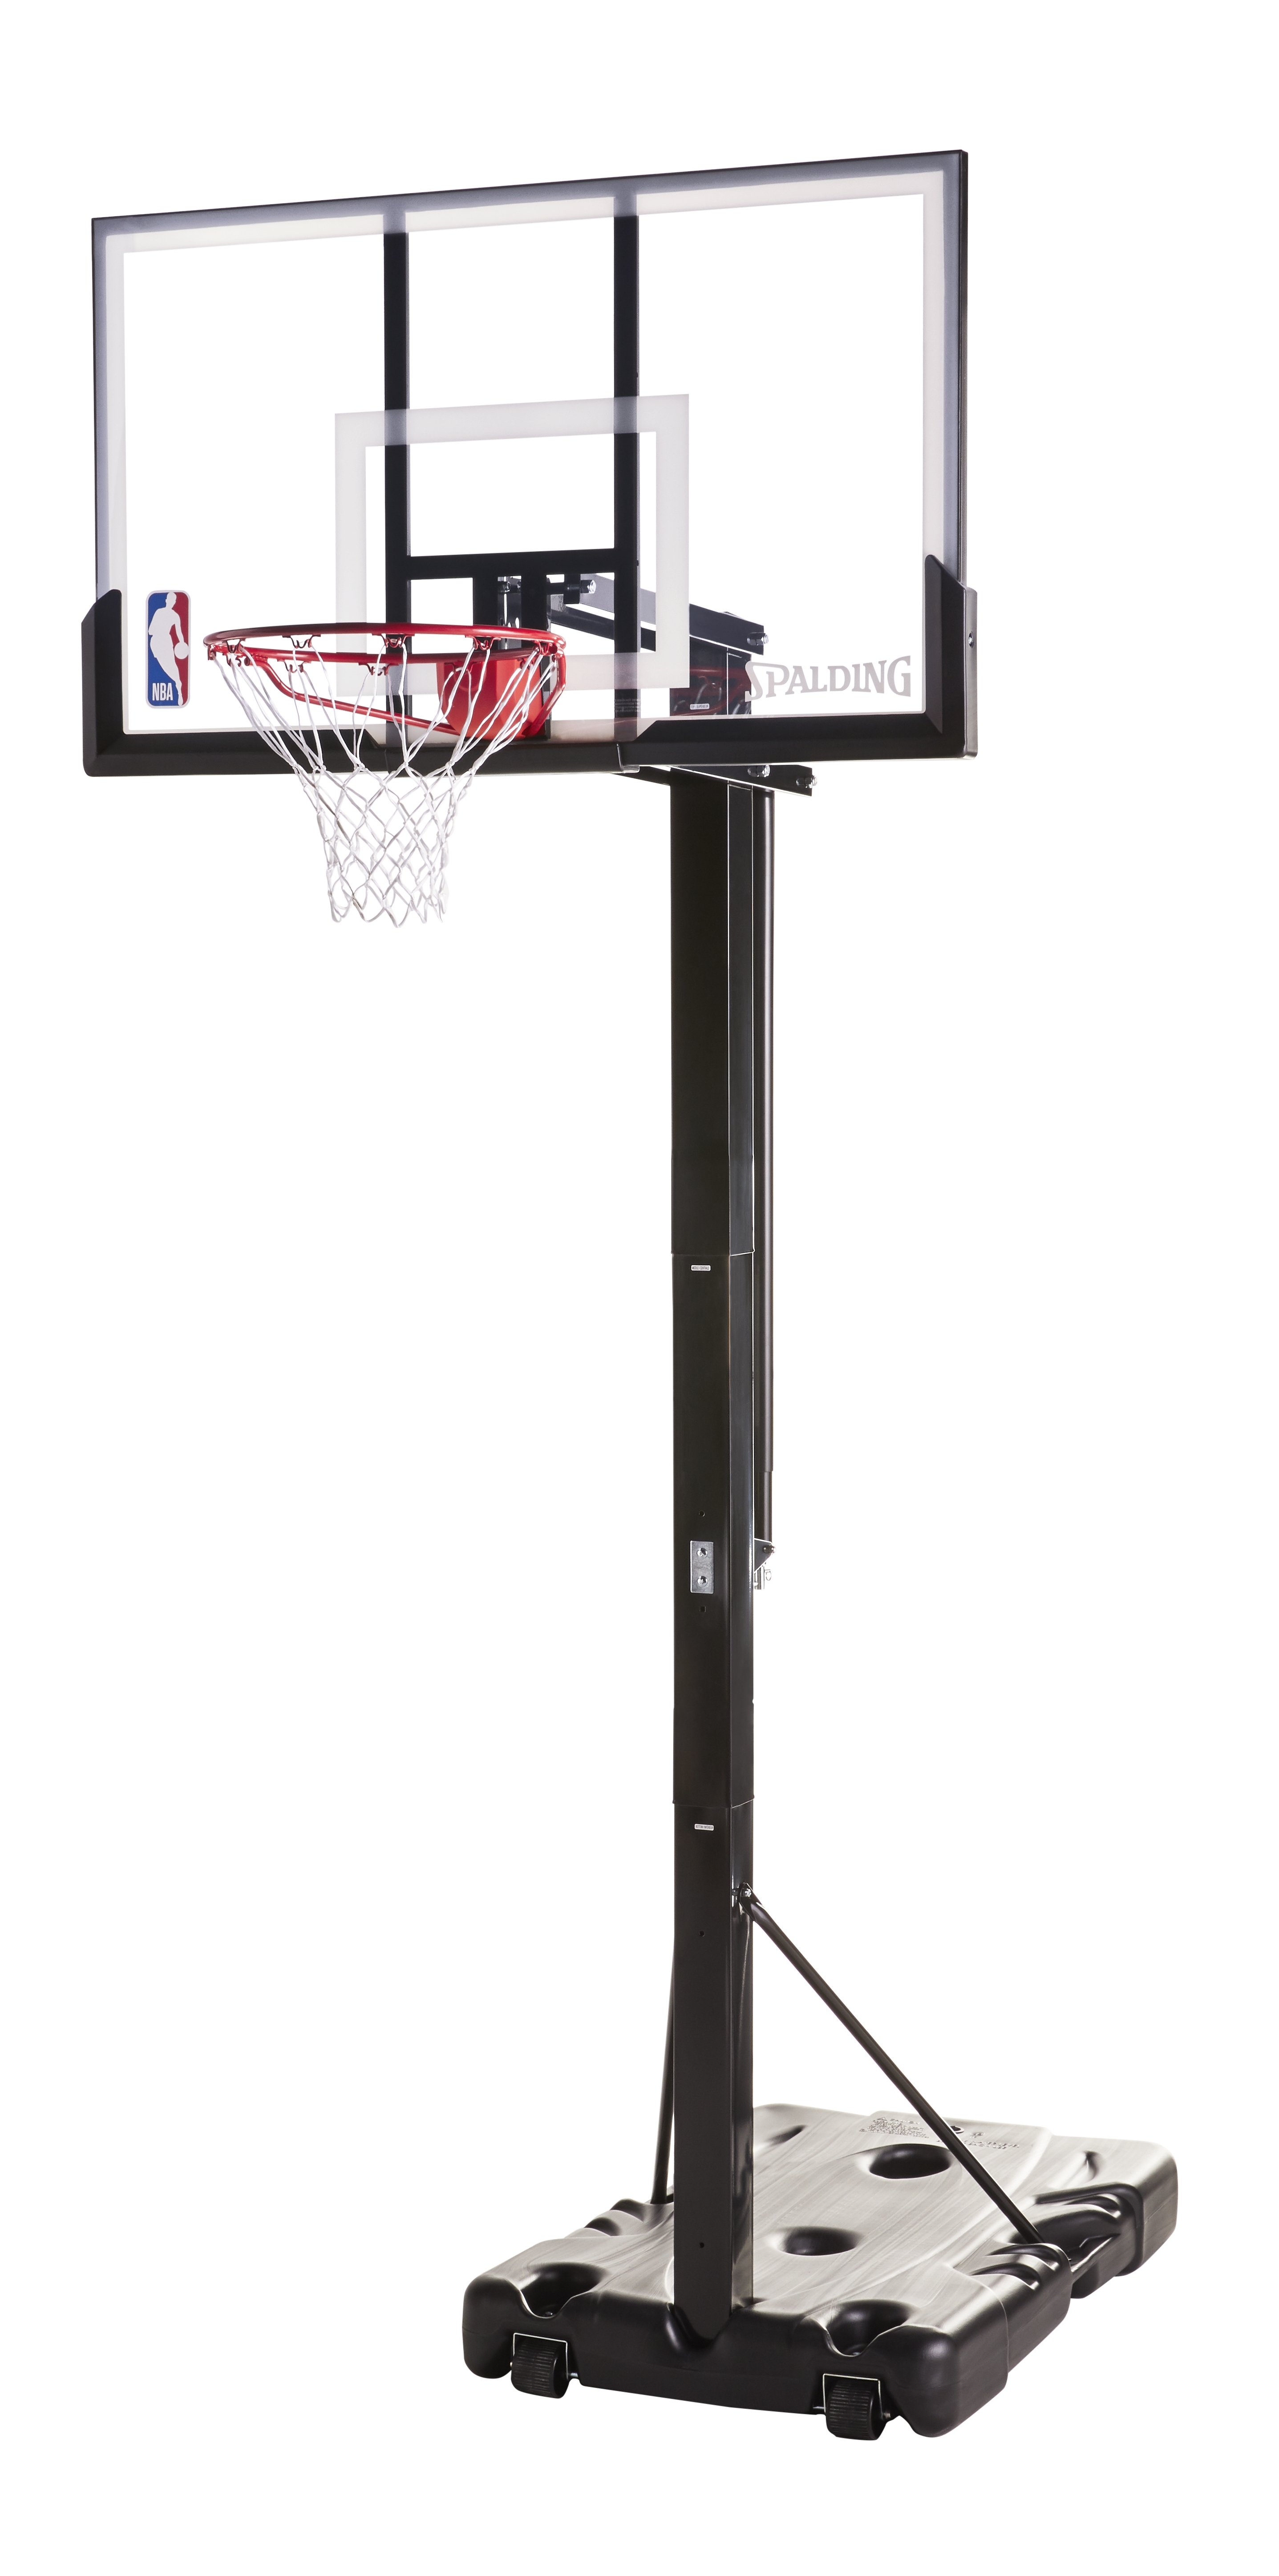 Spalding NBA 54 In. Portable Basketball System Screw Jack Hoop with Polycarbonate Backboard - image 1 of 9